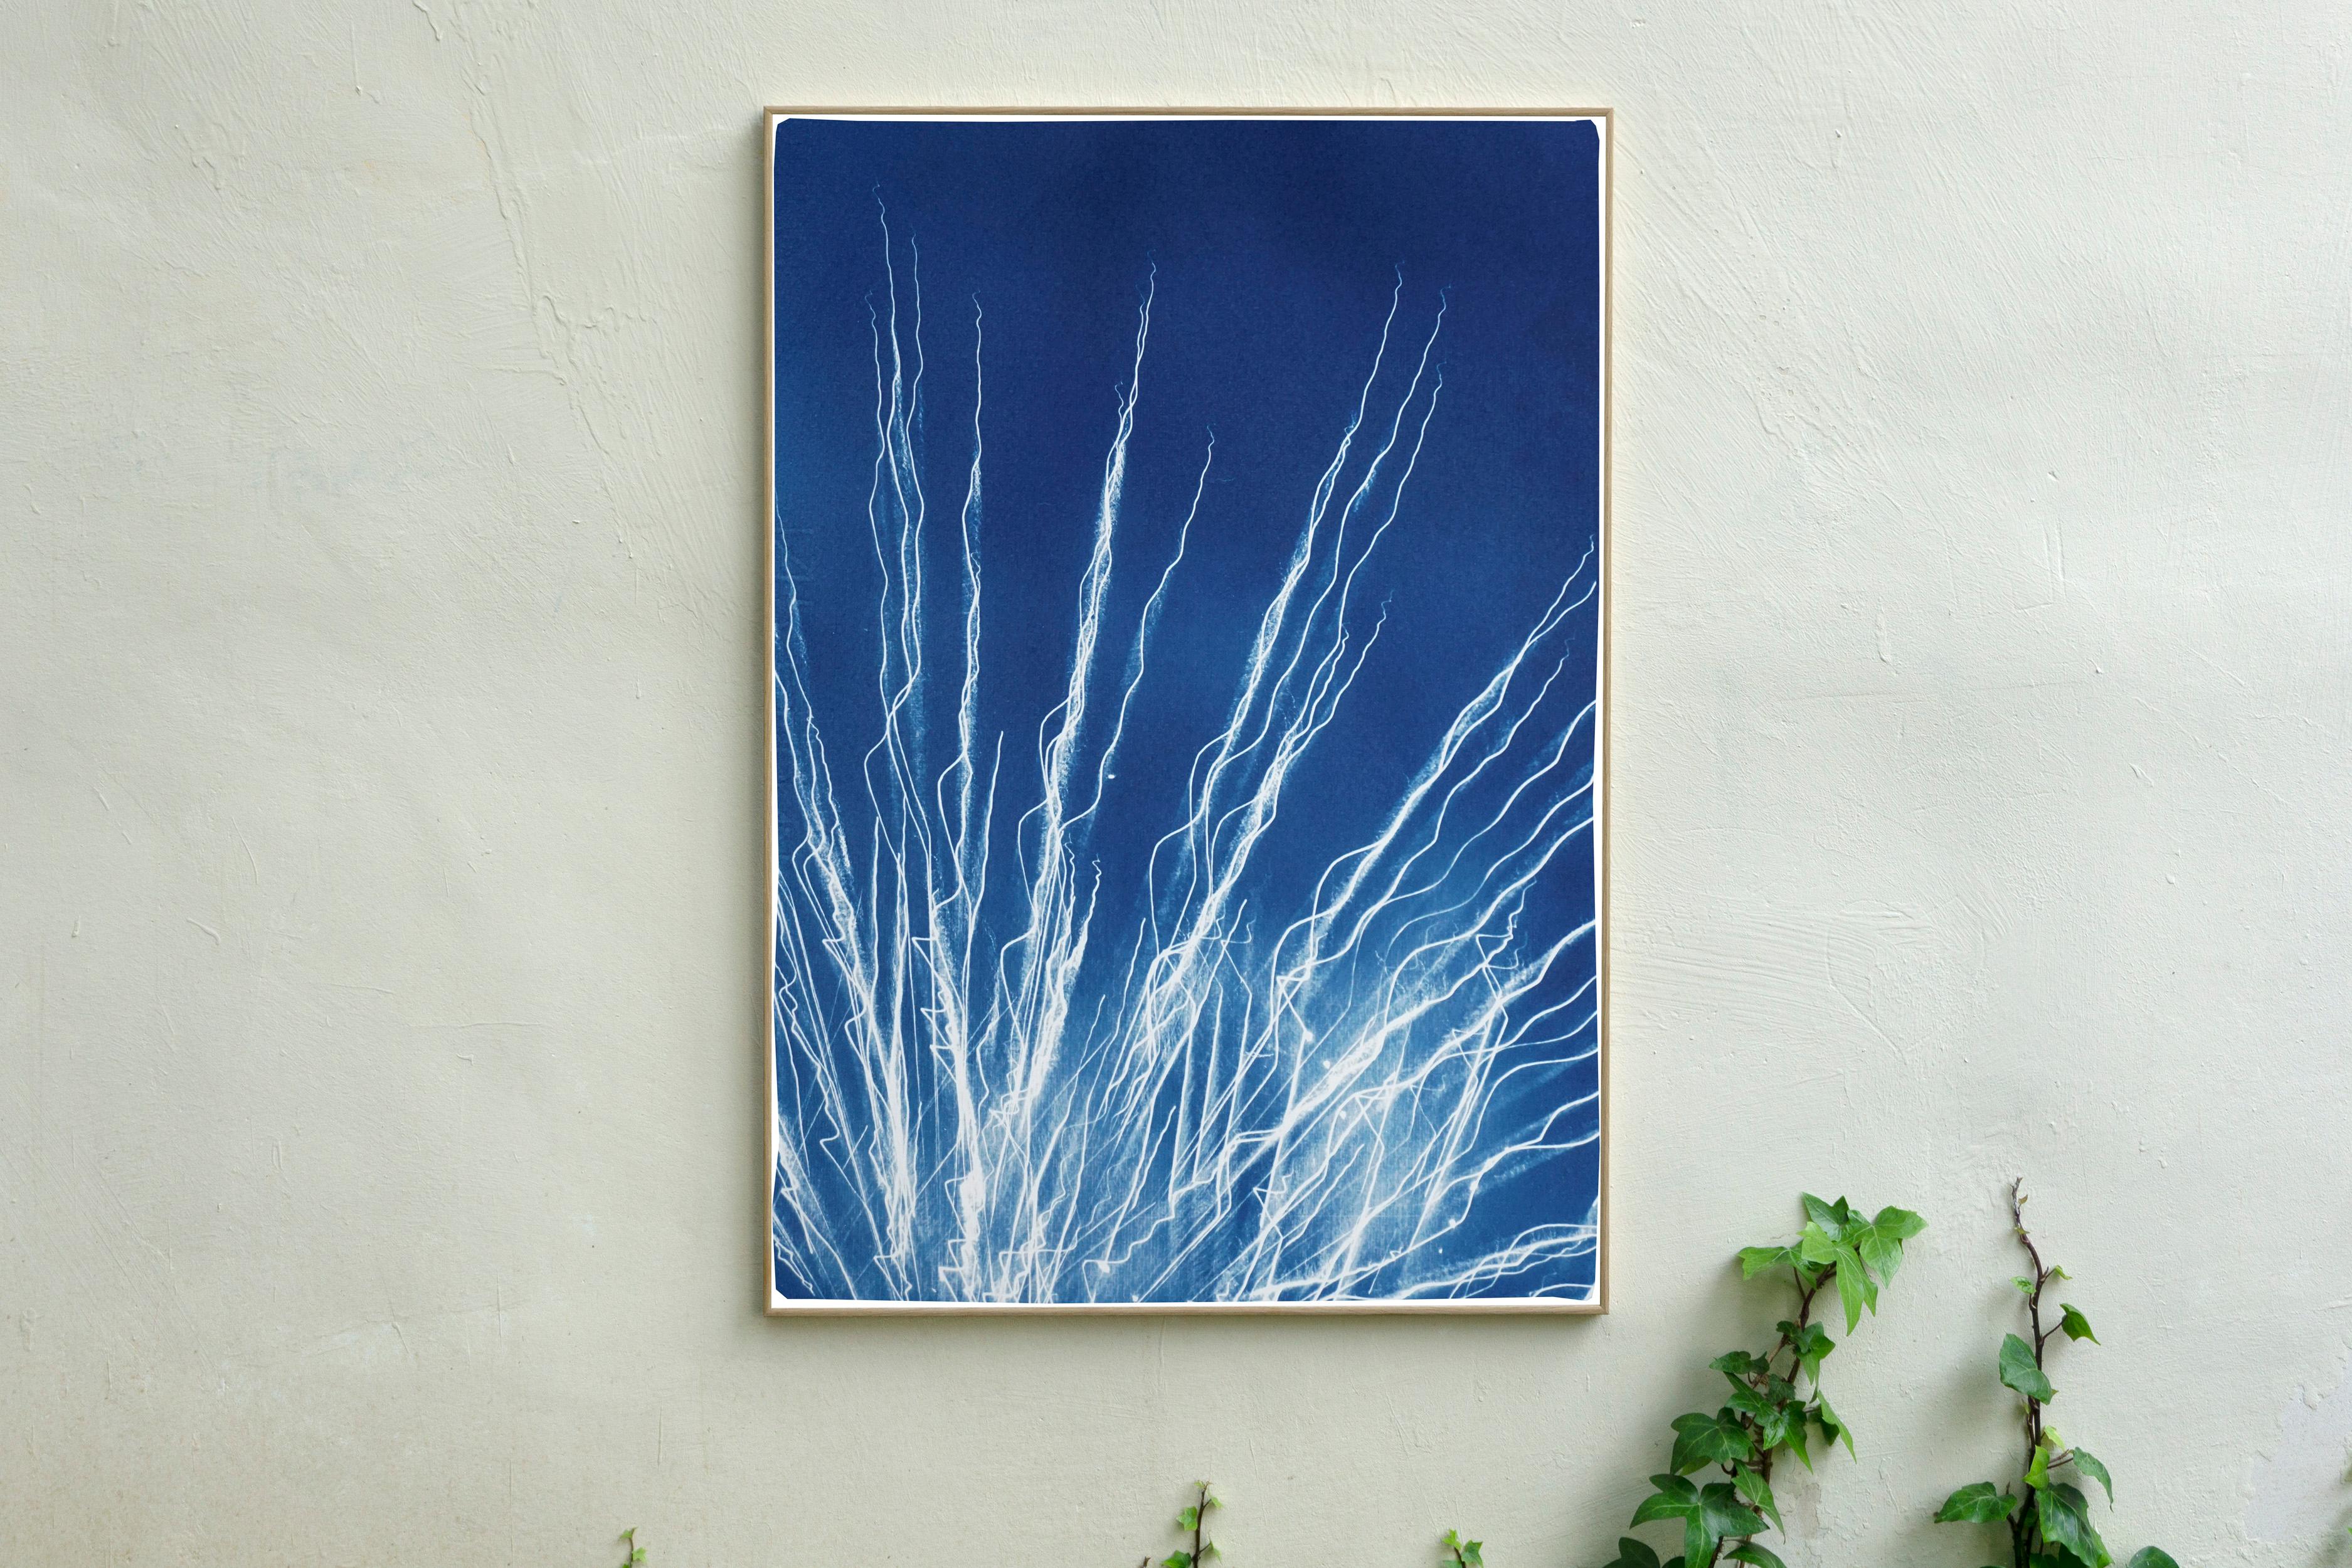 Glowing Fireworks Lights, Electric Blue and White Abstract Shapes, Cyanotype  For Sale 4